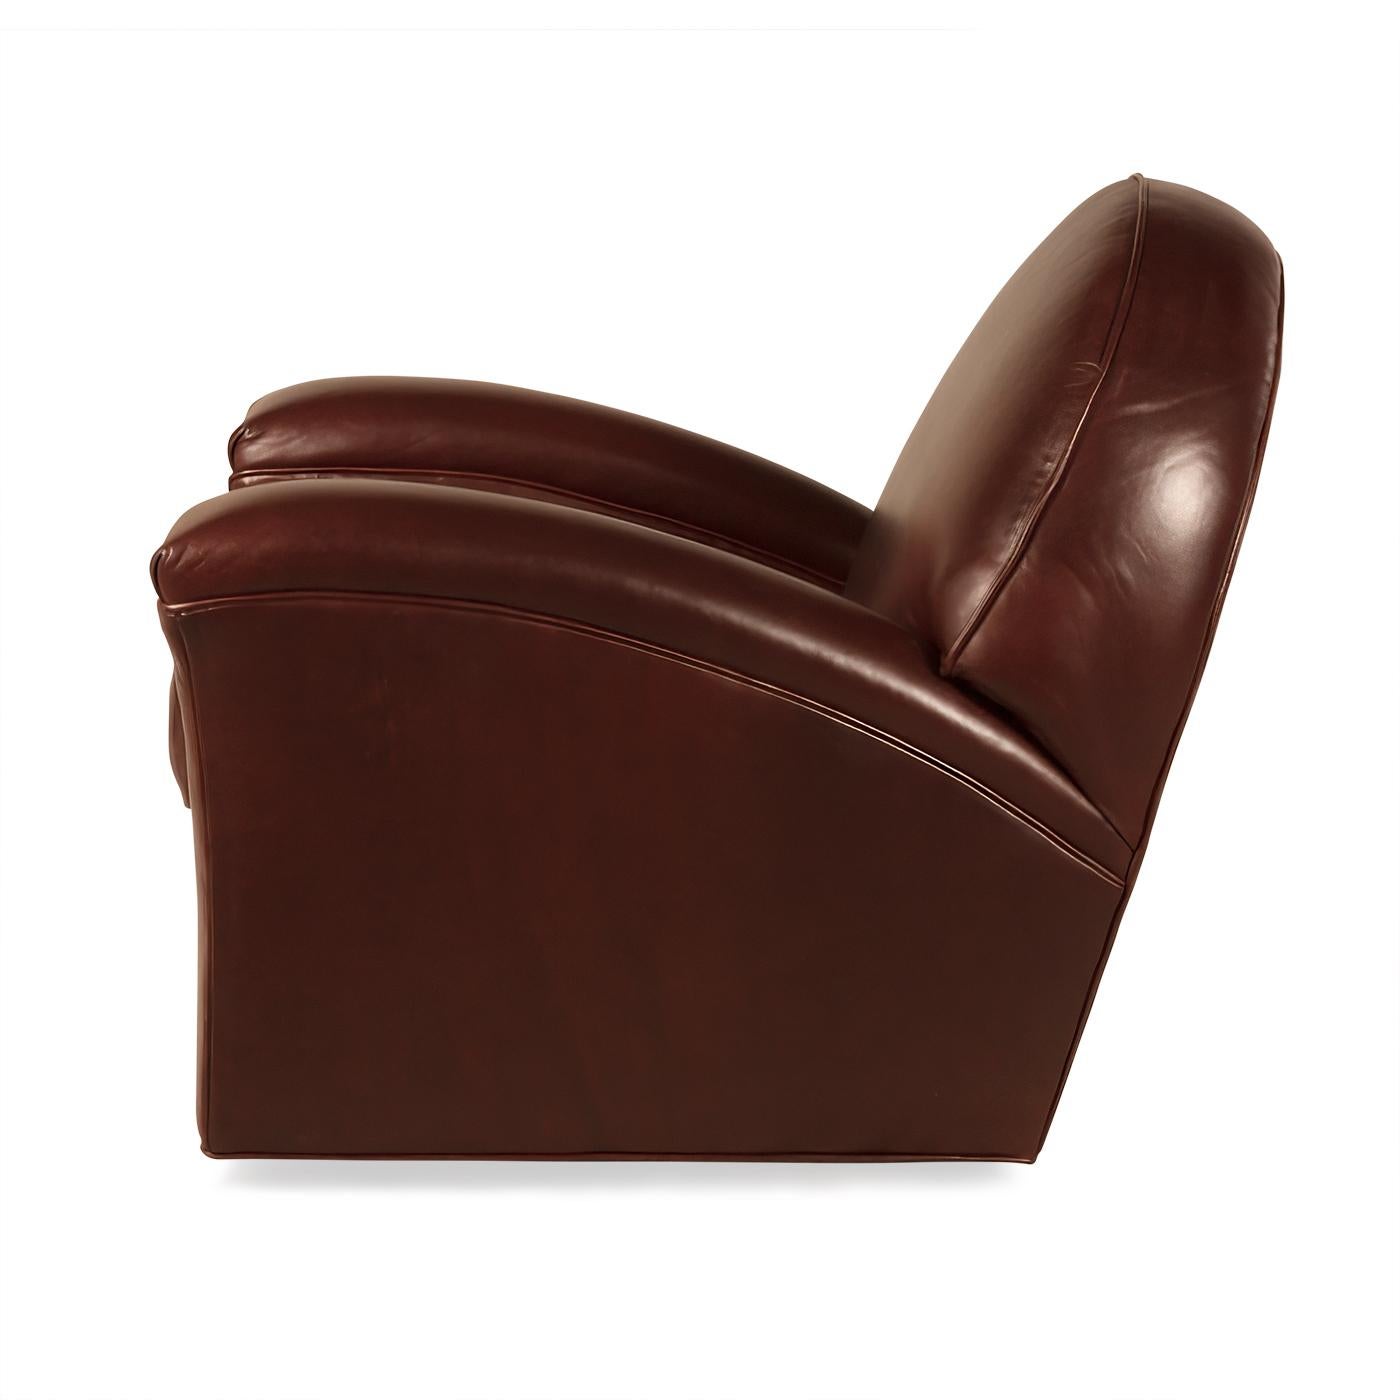 American Art Deco Style Leather Club Chair For Sale